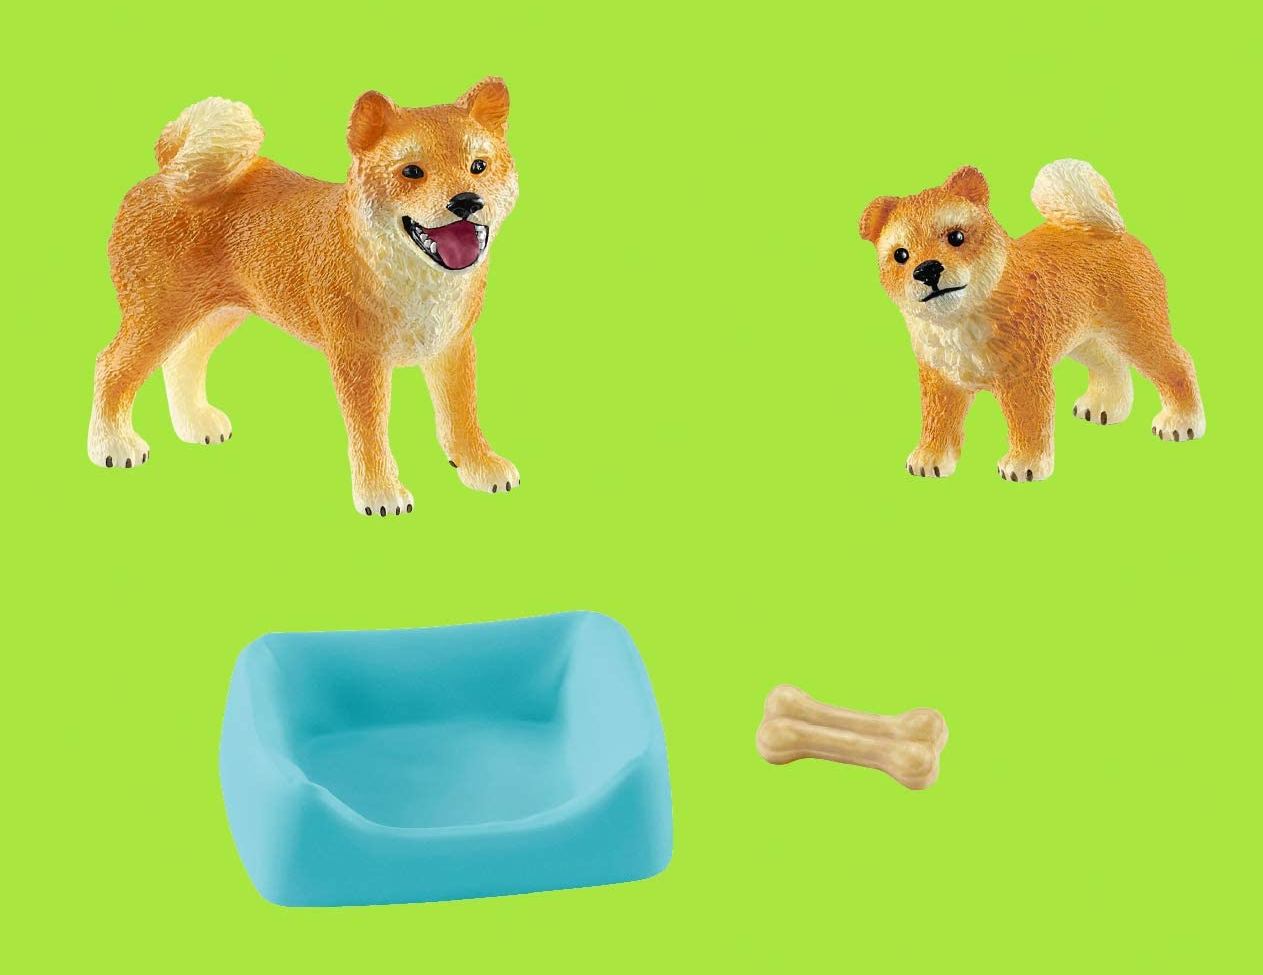 Dog toys with bed and bone